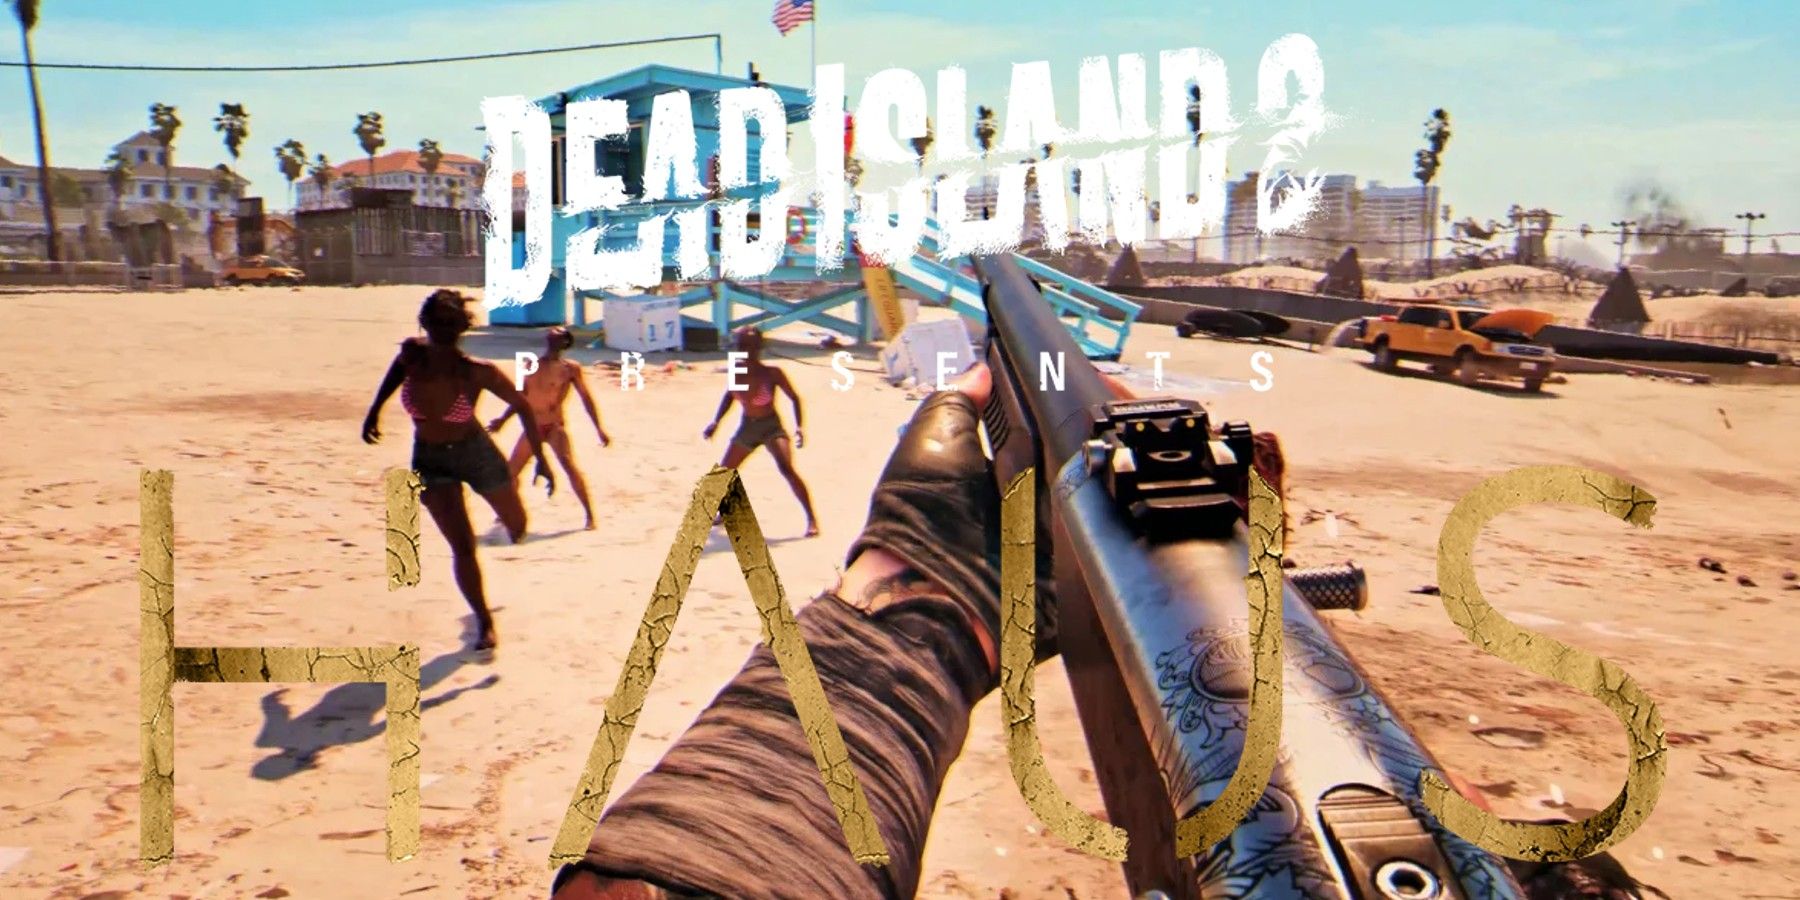 Dead Island 2's Haus DLC New Weapons Explained